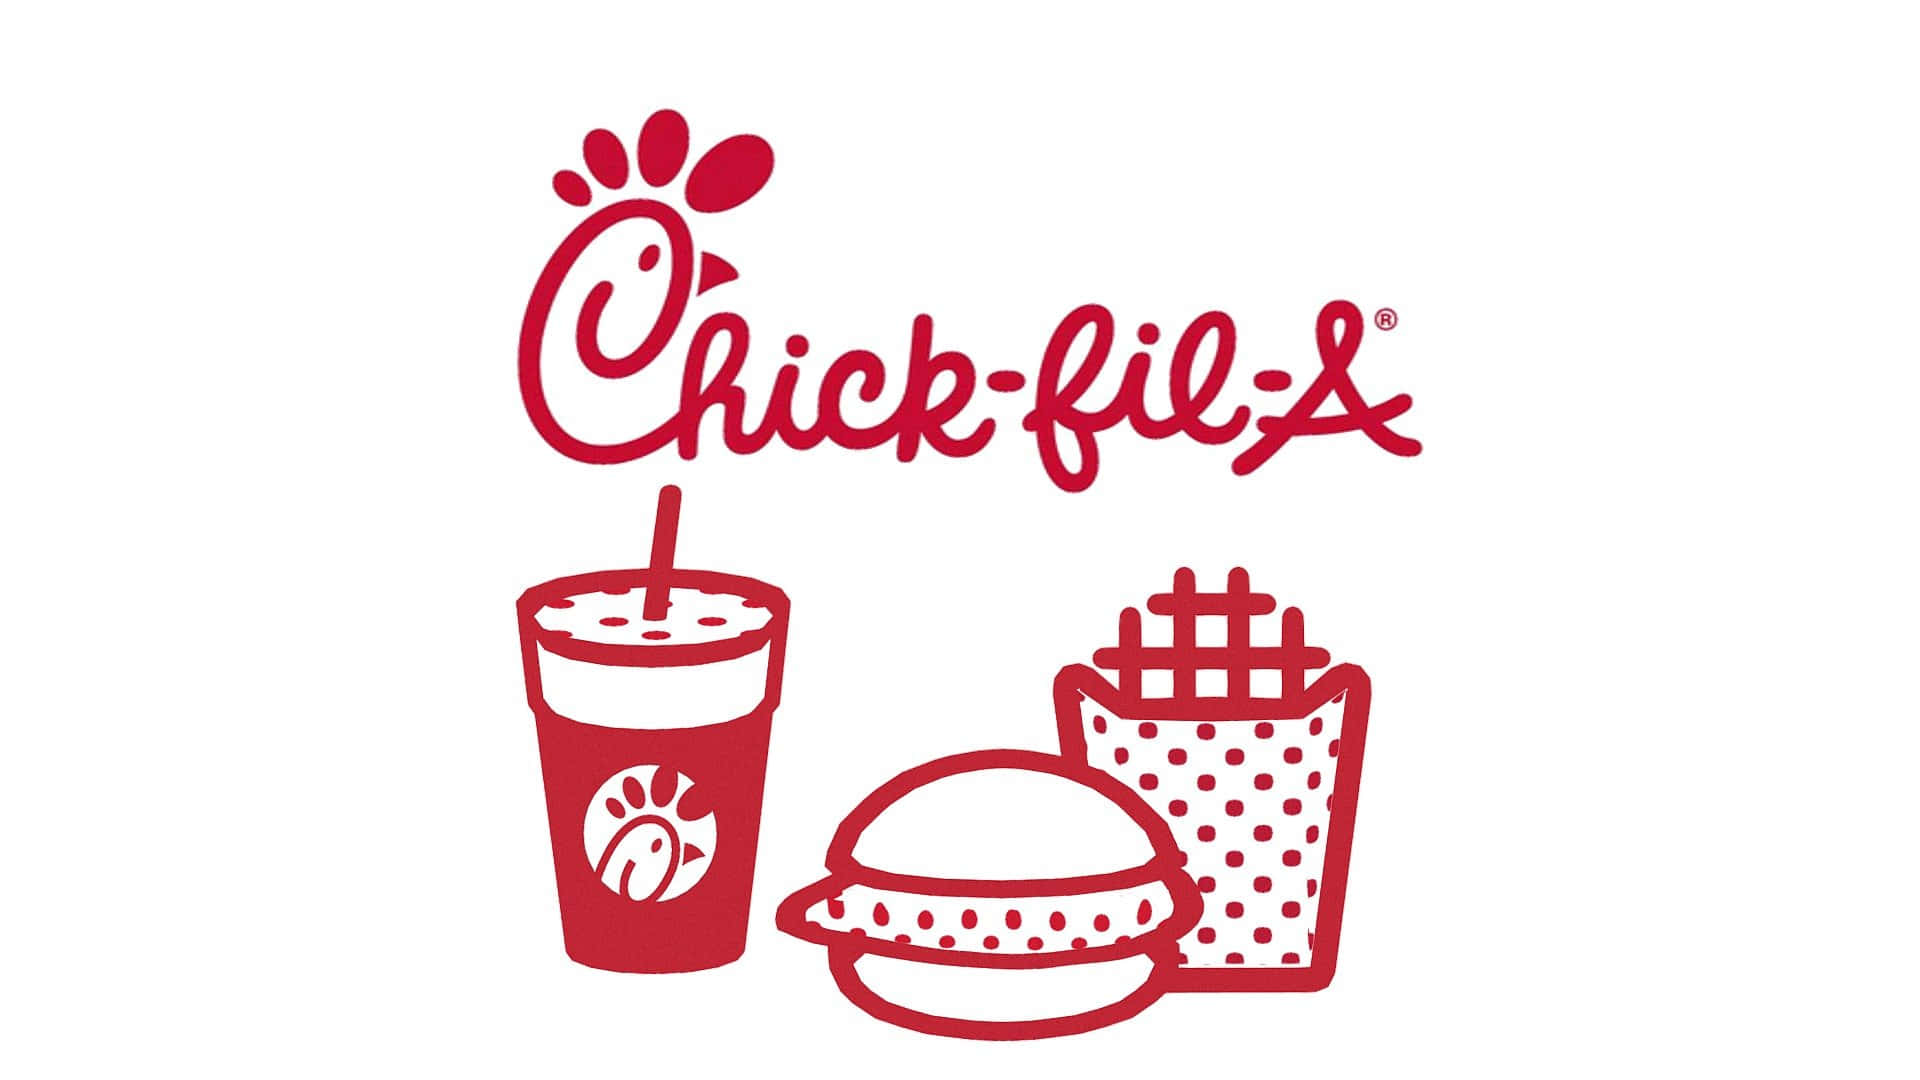 Chick Fil A Logo With A Burger And Fries